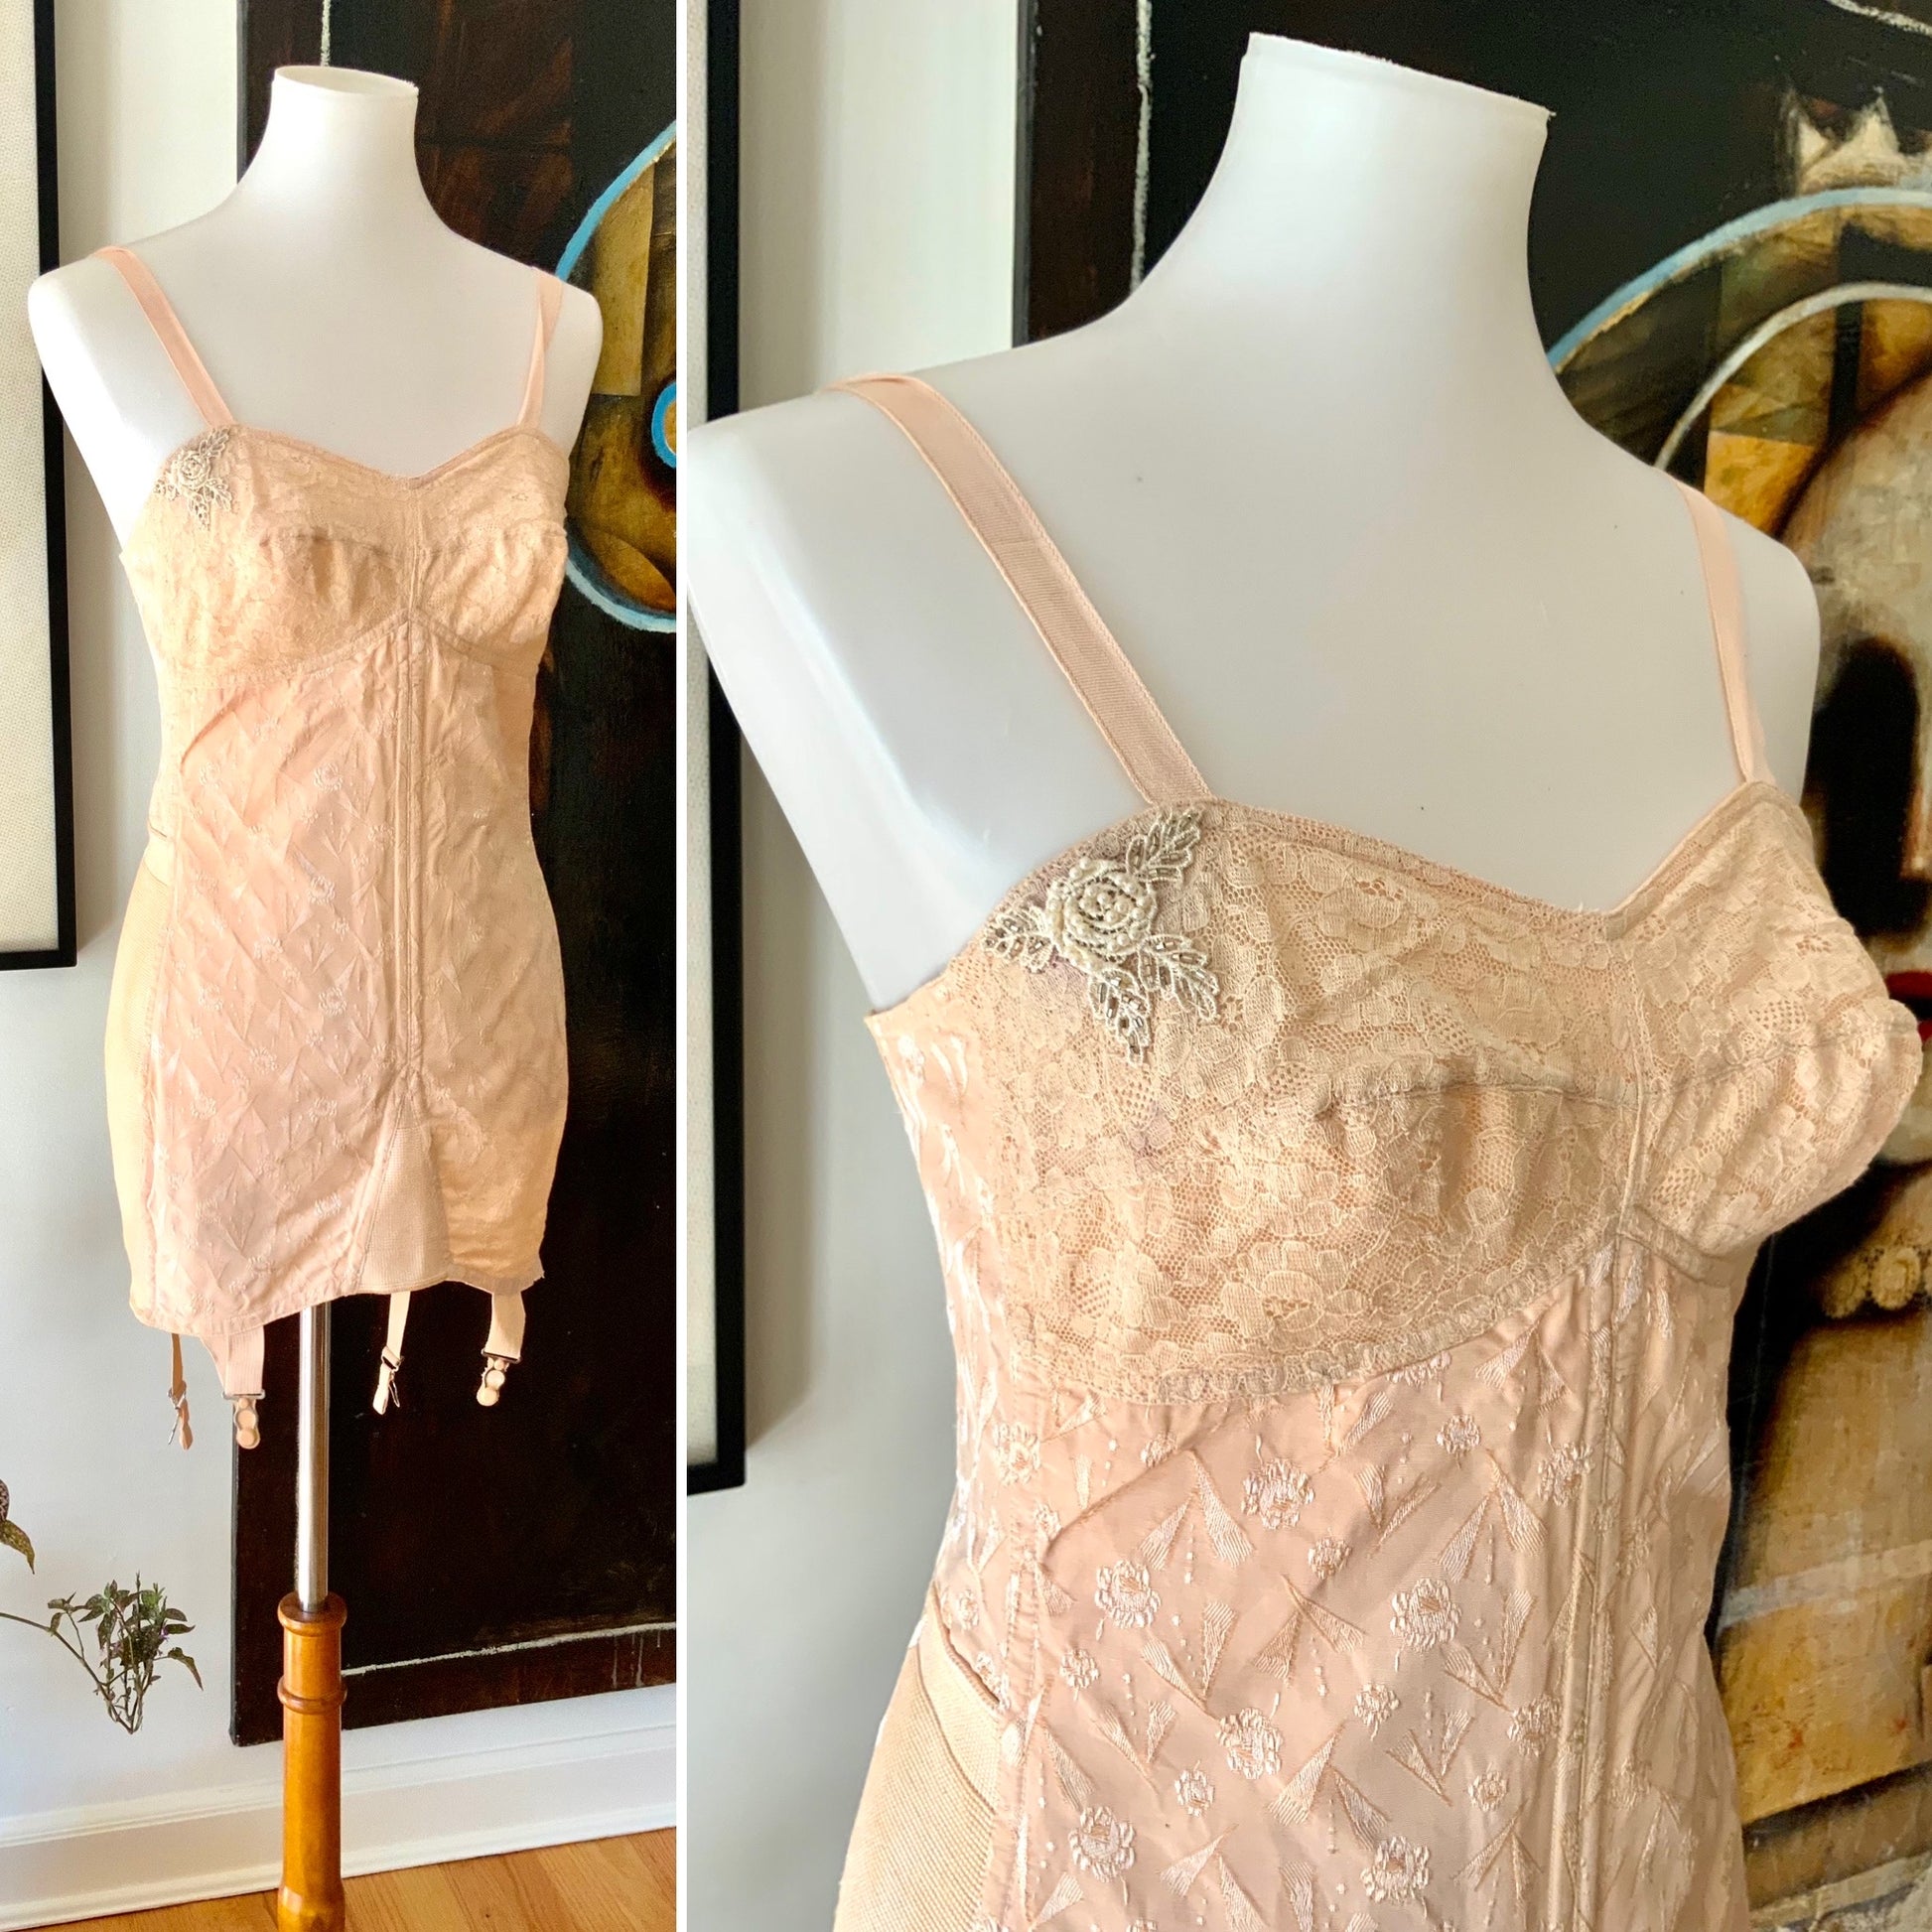 ONE WHITE CORSET, c. 1900 & ONE PINK, 1920s sold at auction on